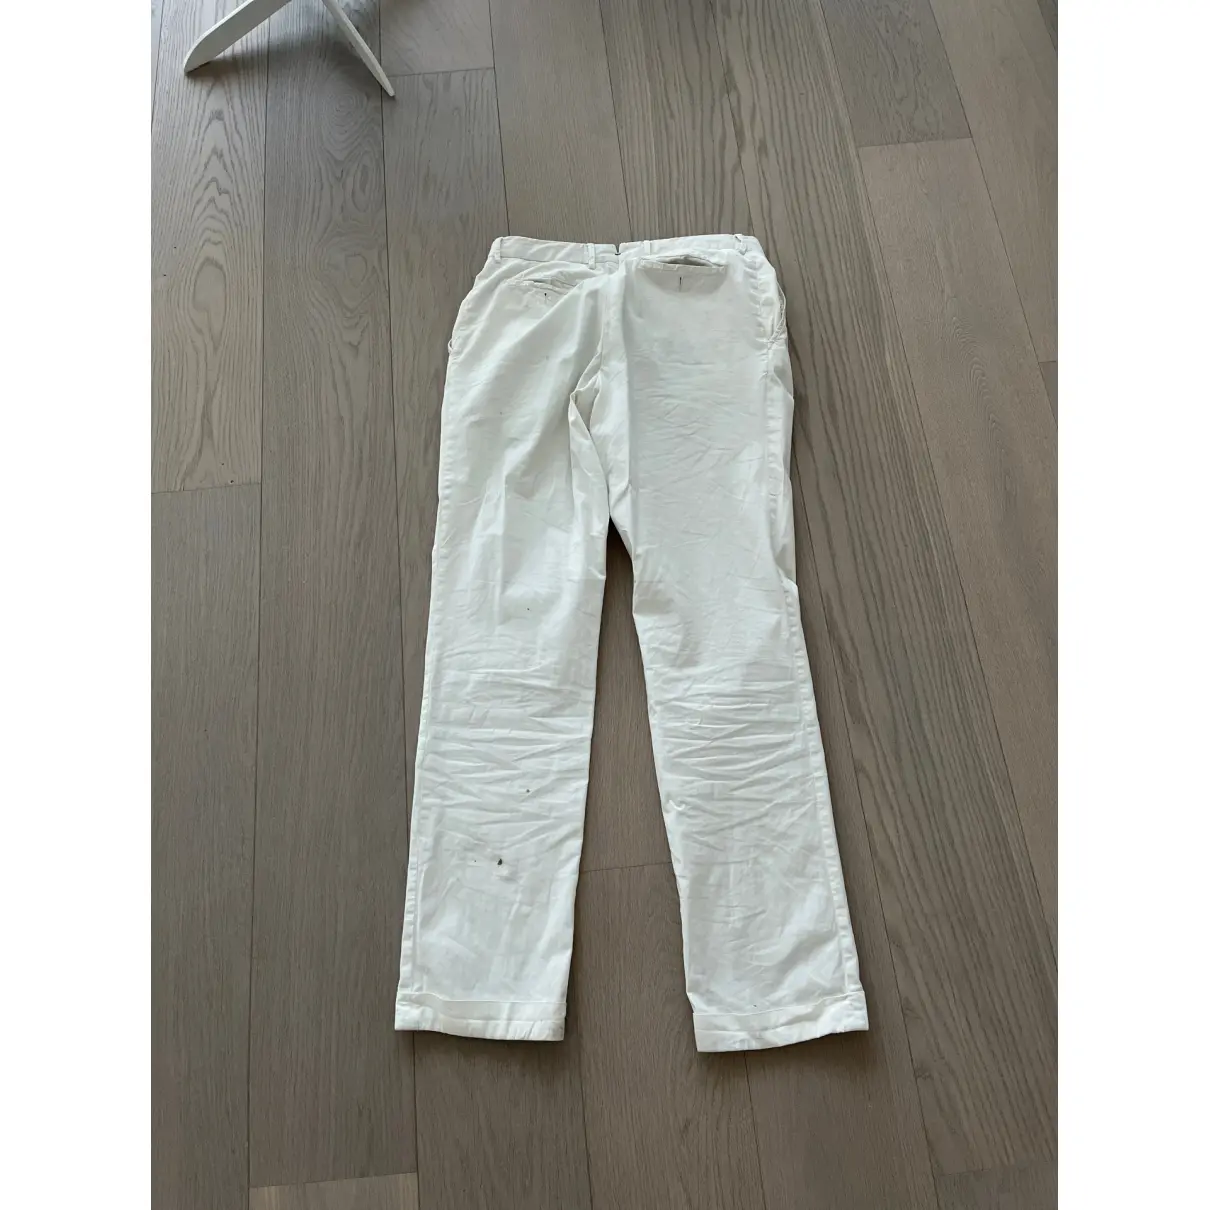 Buy Caruso Trousers online